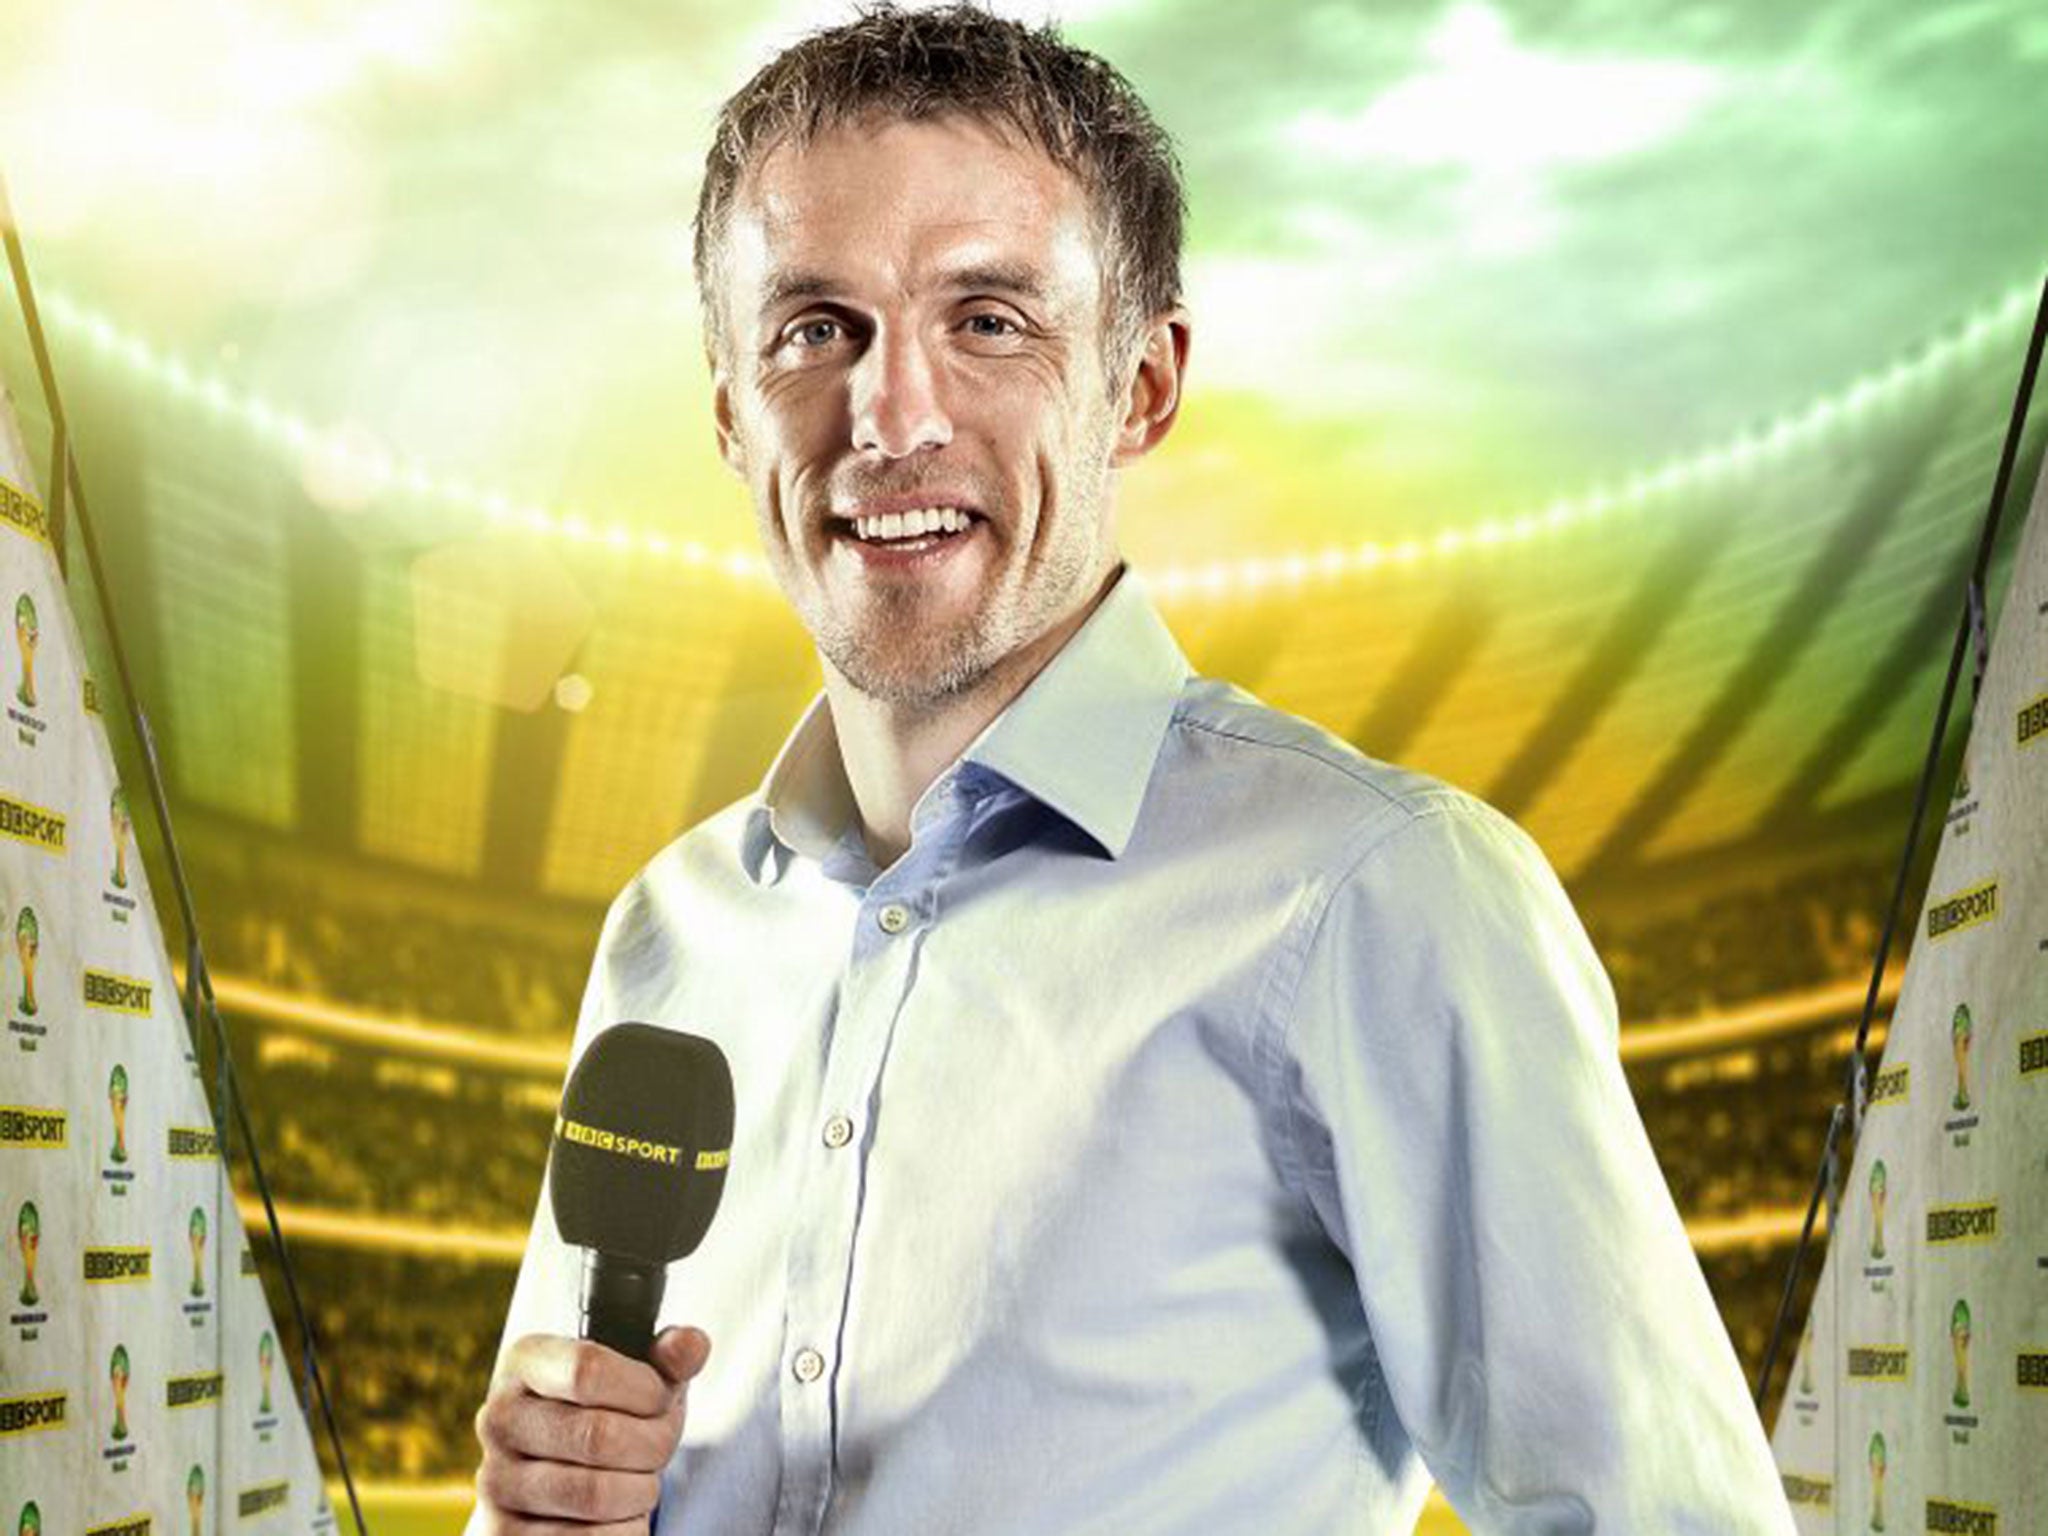 Phil Neville took the brunt of the abuse by virtue of being
watched by the most people